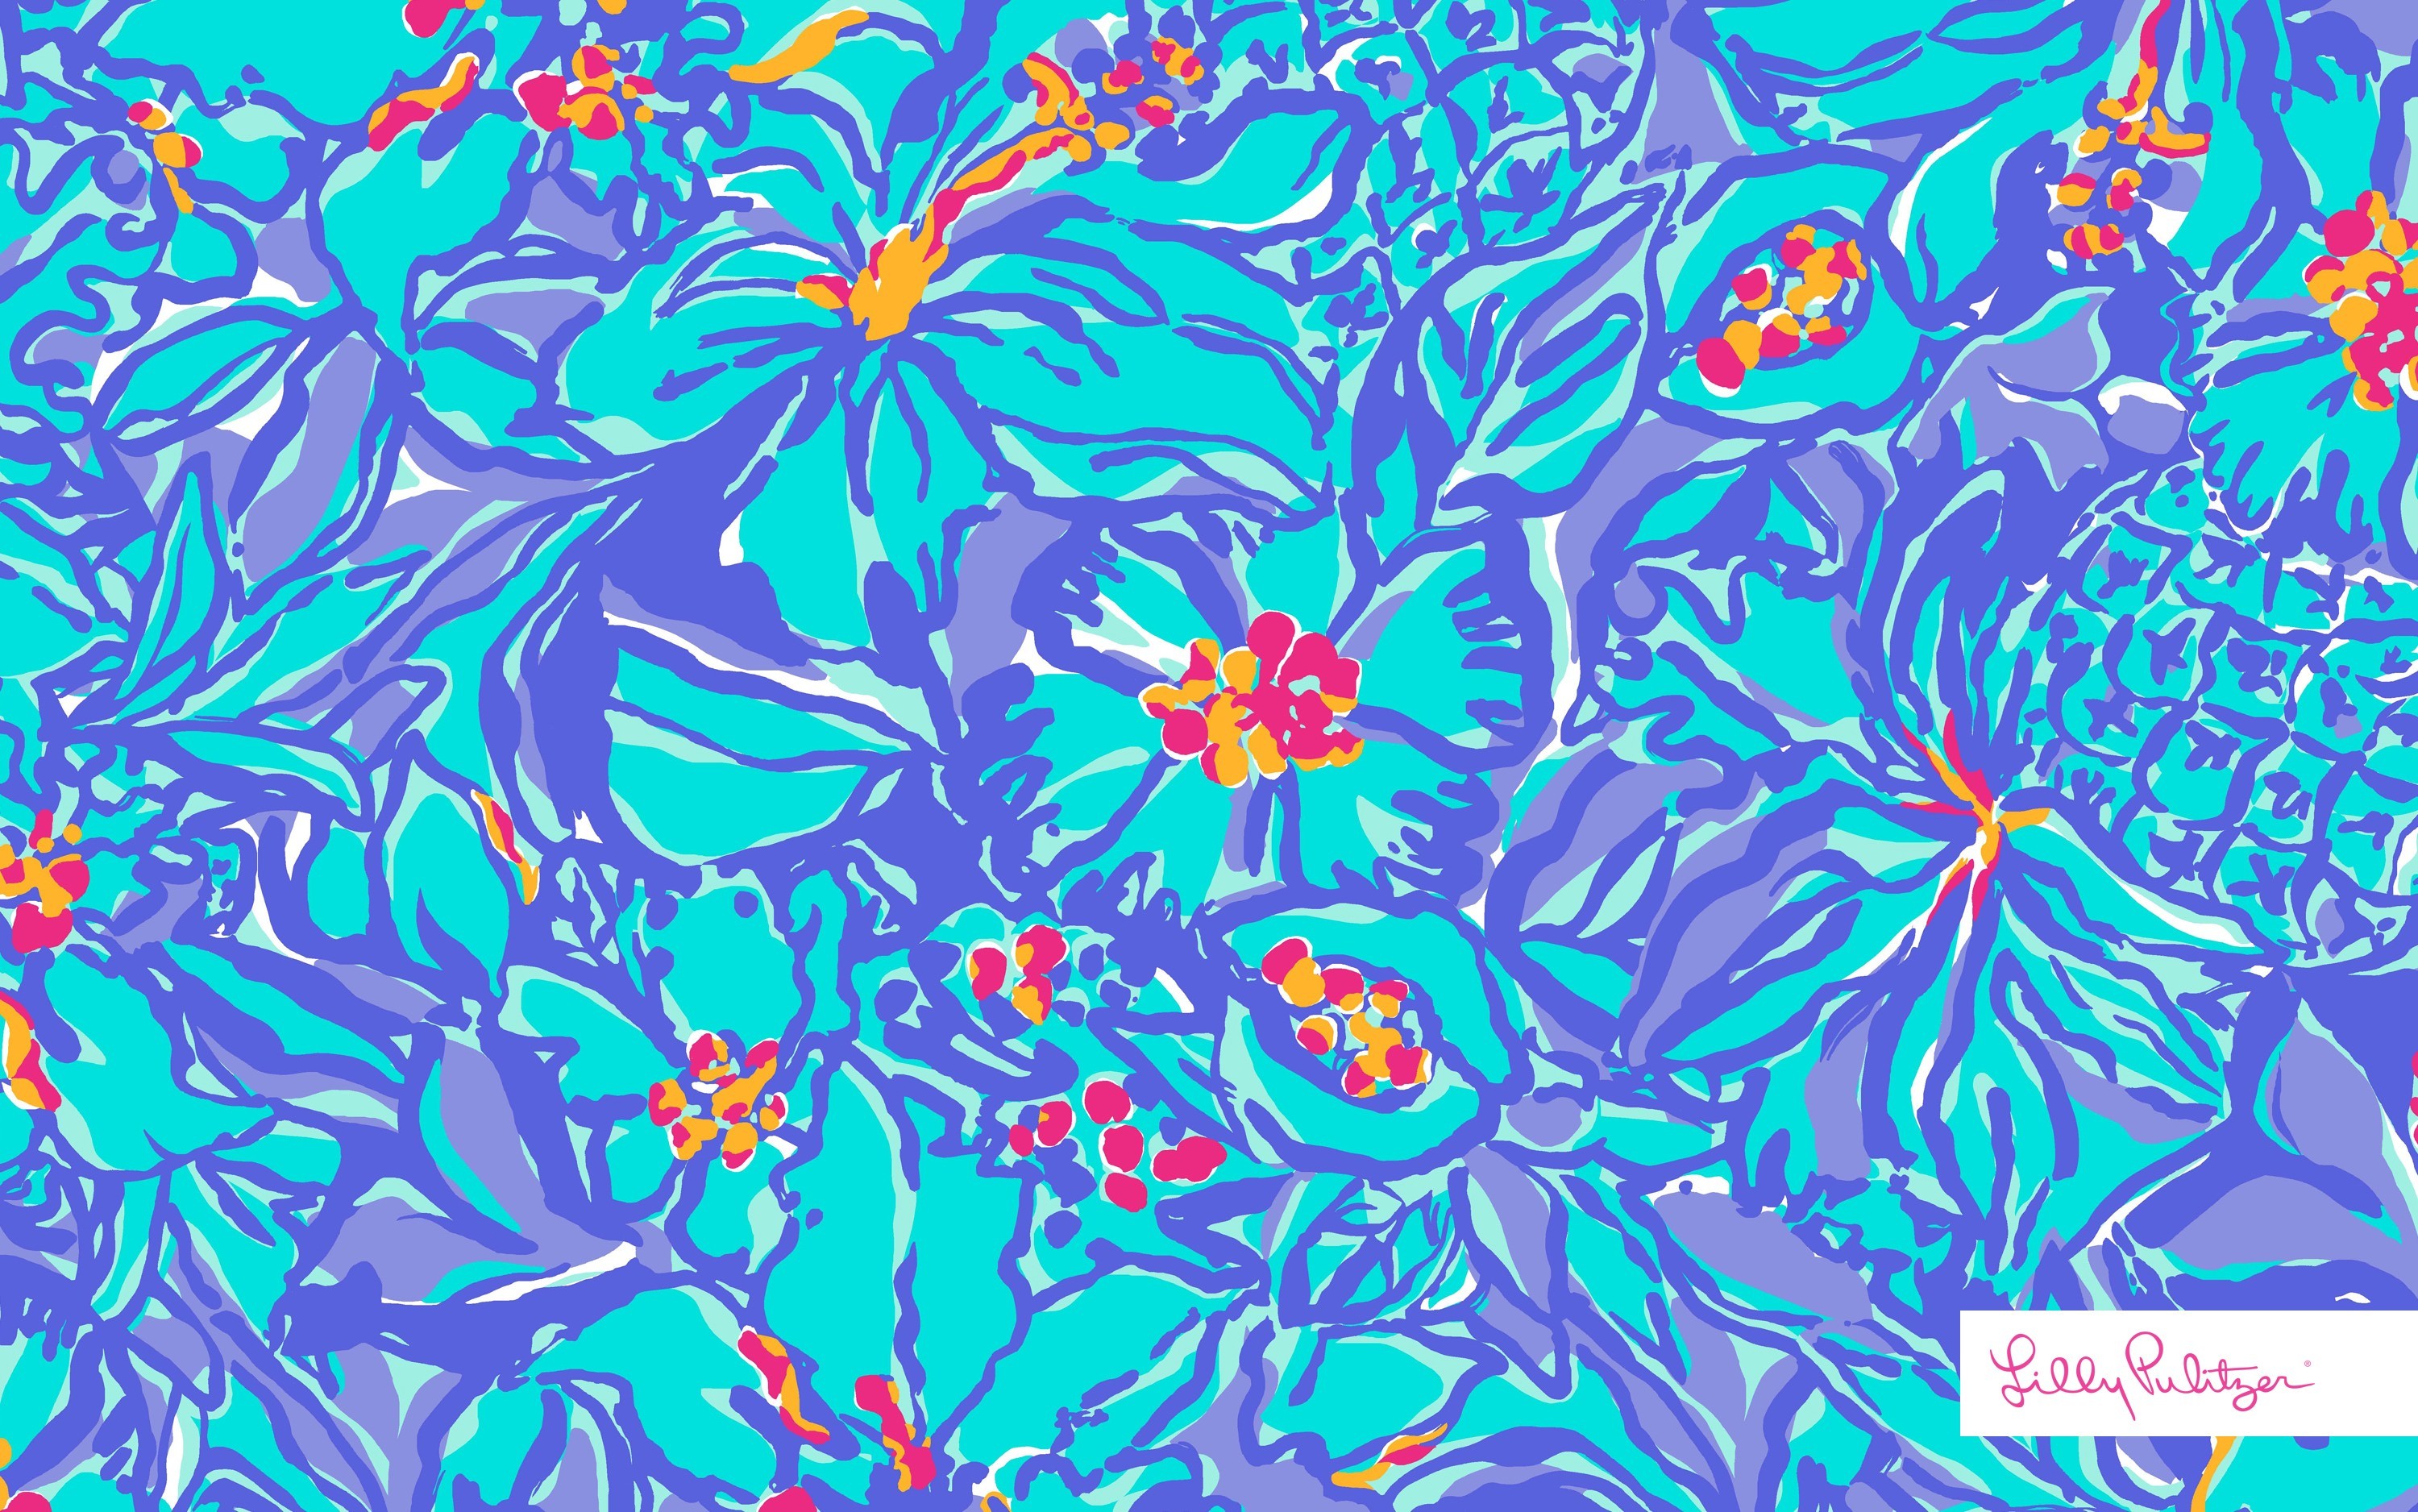 Wallpaper 3,0001,876 pxeles Lilly Pulitzer